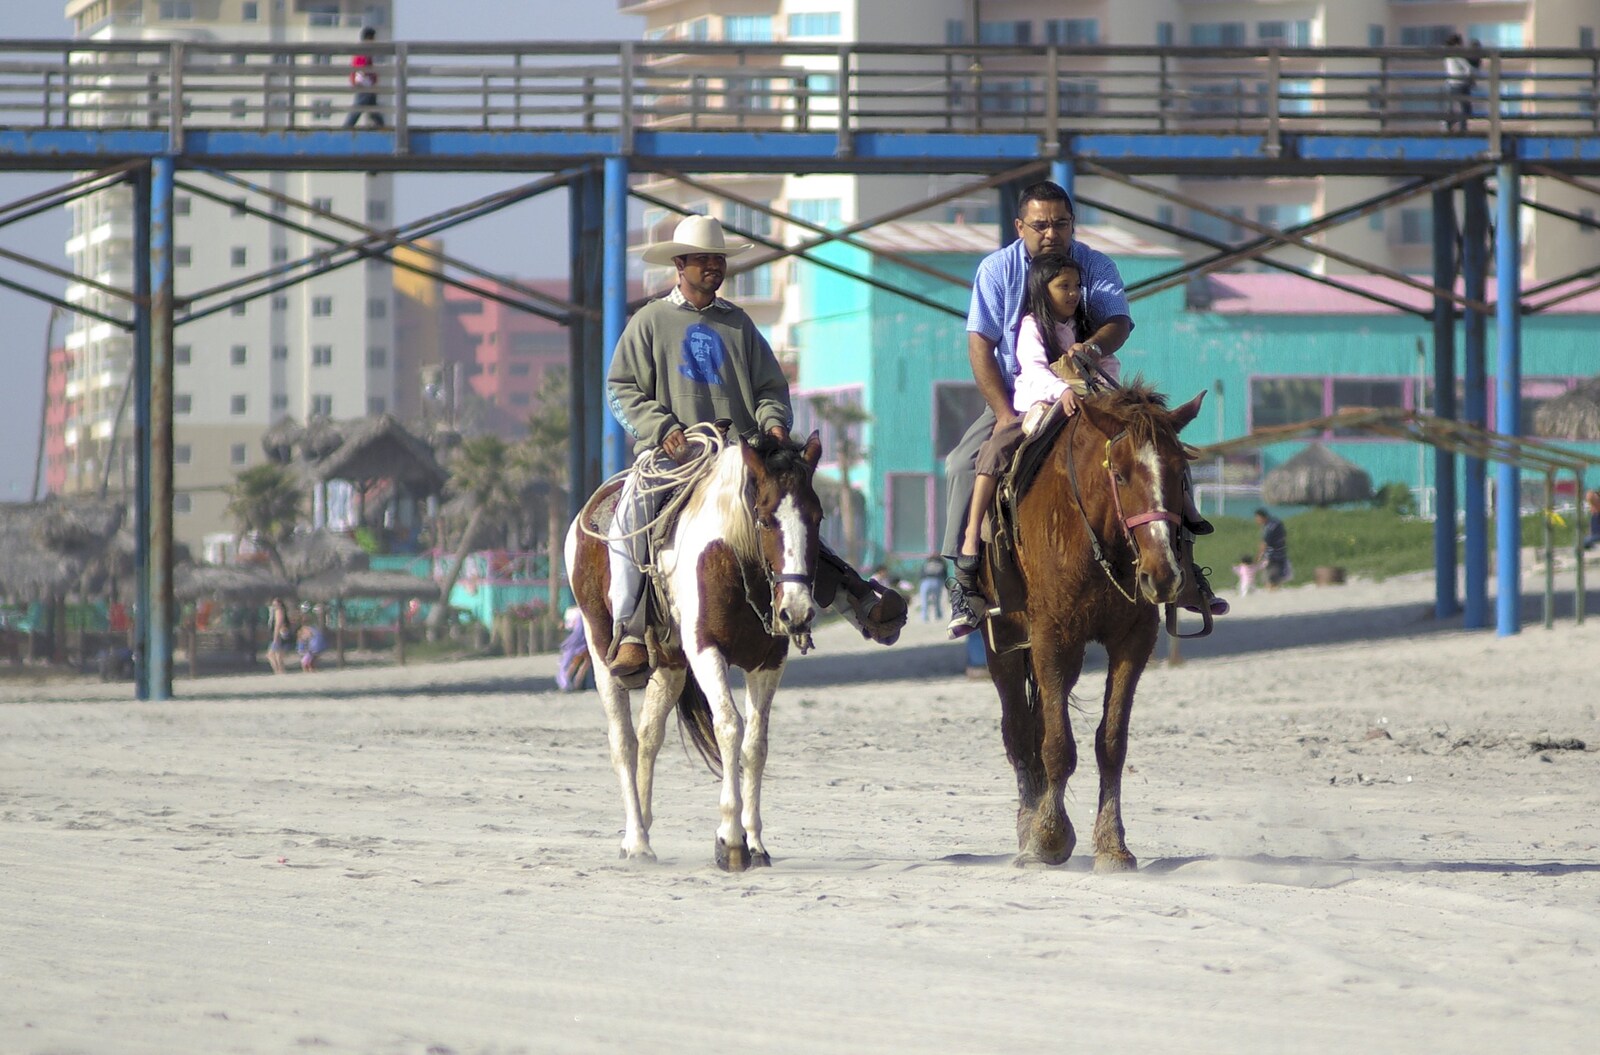 Rosarito and Tijuana, Baja California, Mexico - 2nd March 2008: Ponies trot on the beach